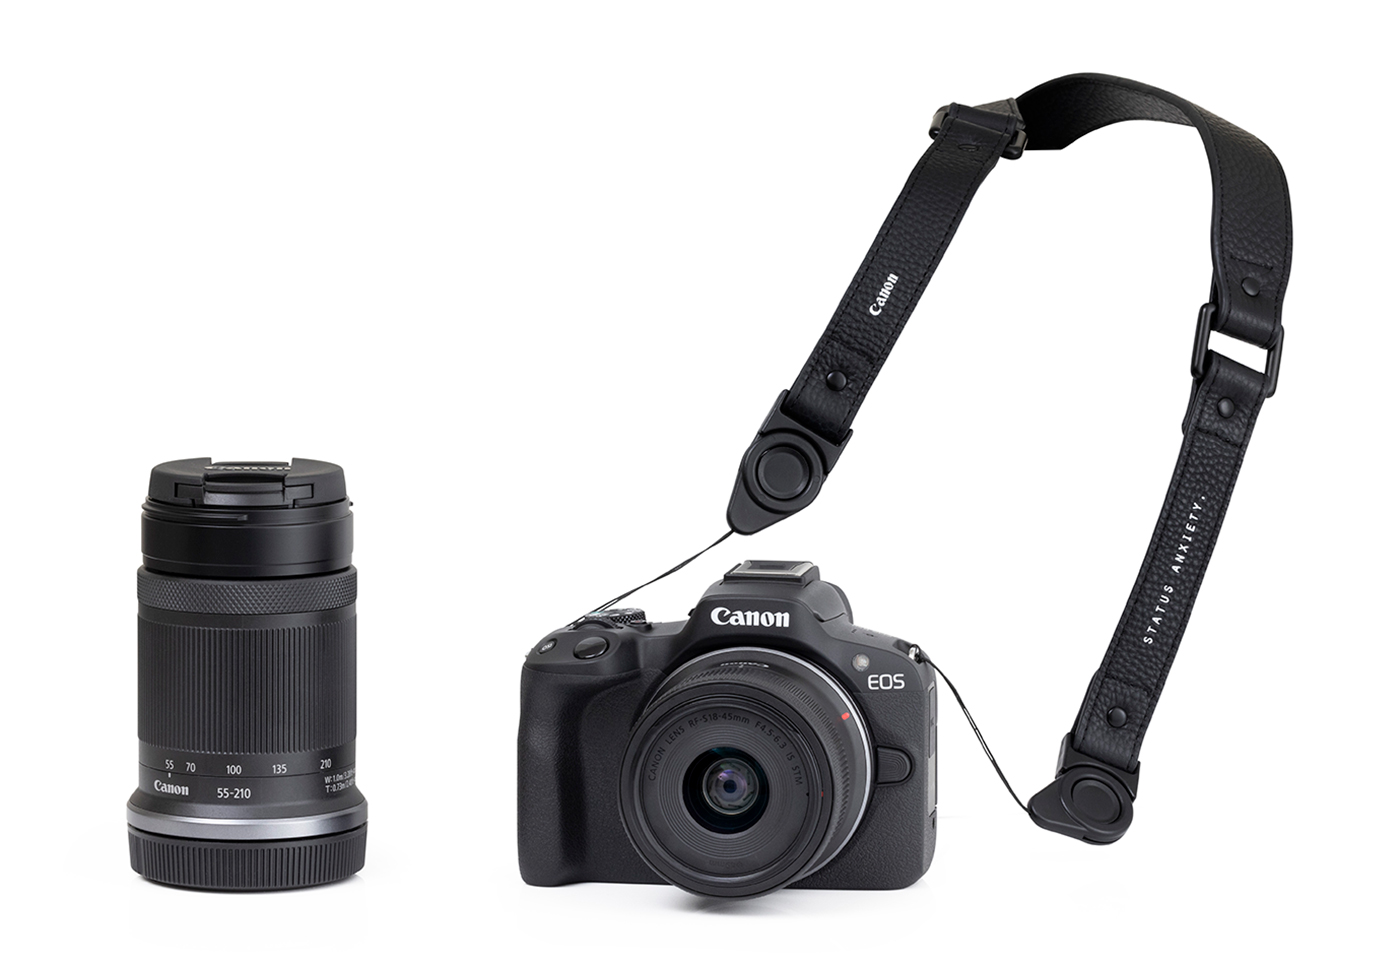 EOS R50 Limited Edition Twin Kit with RF-S 18-45mm IS STM, RF-S 55-210 f/3.5-6.3 IS STM and bonus Status Anxiety Limited Edition camera strap